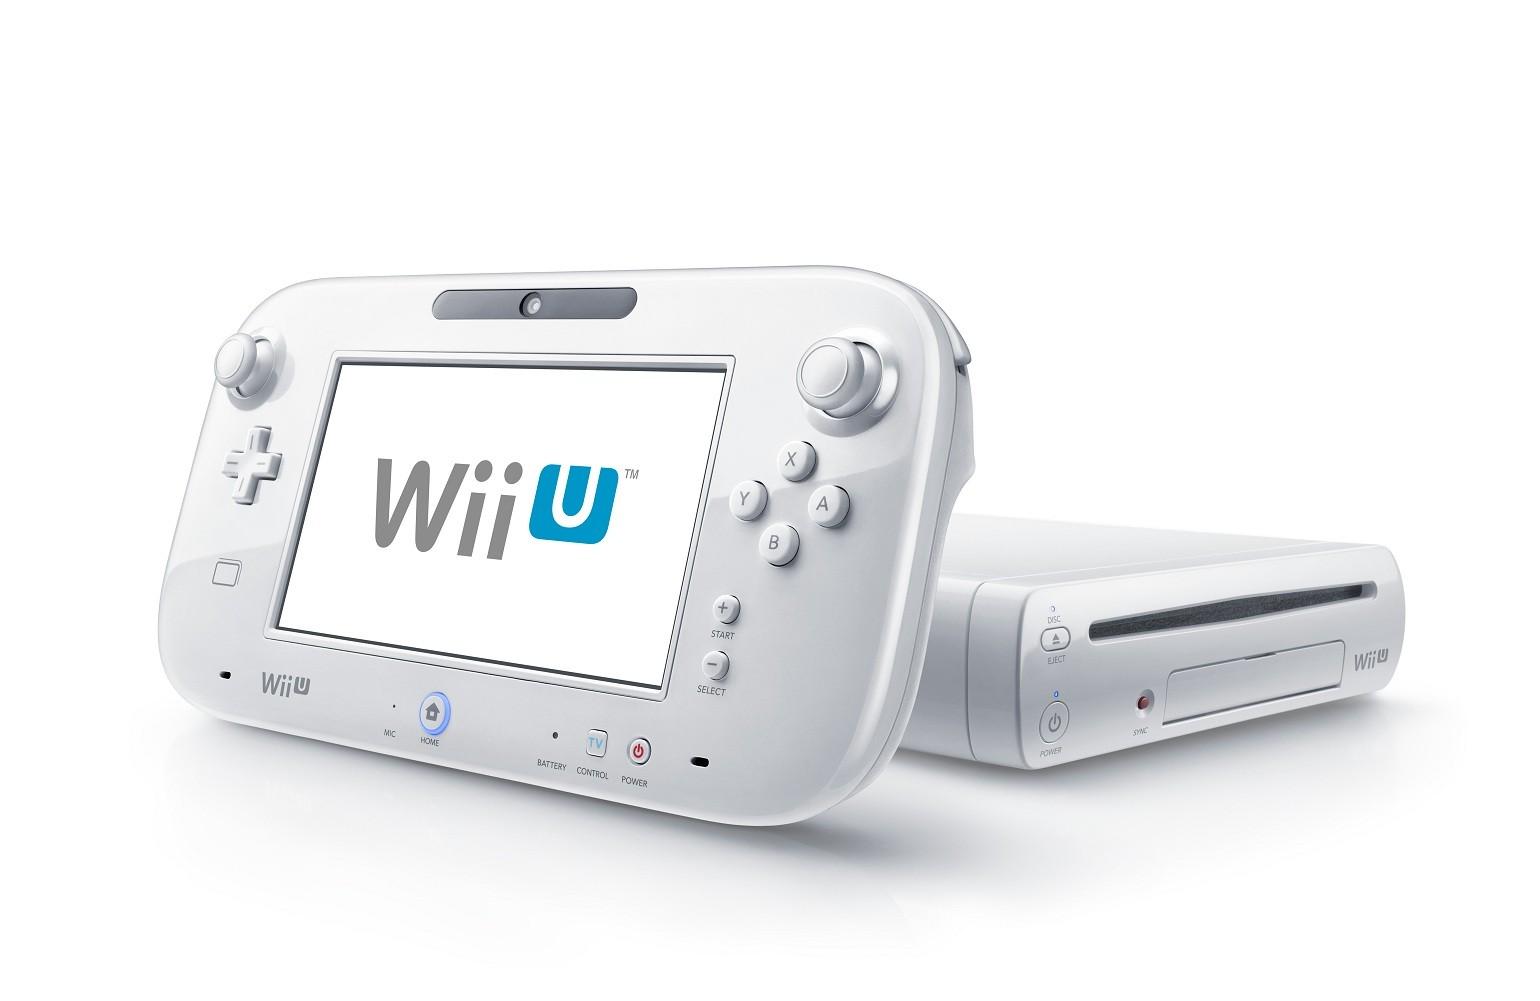 10 Most Awesome Games on Wii U in 2013